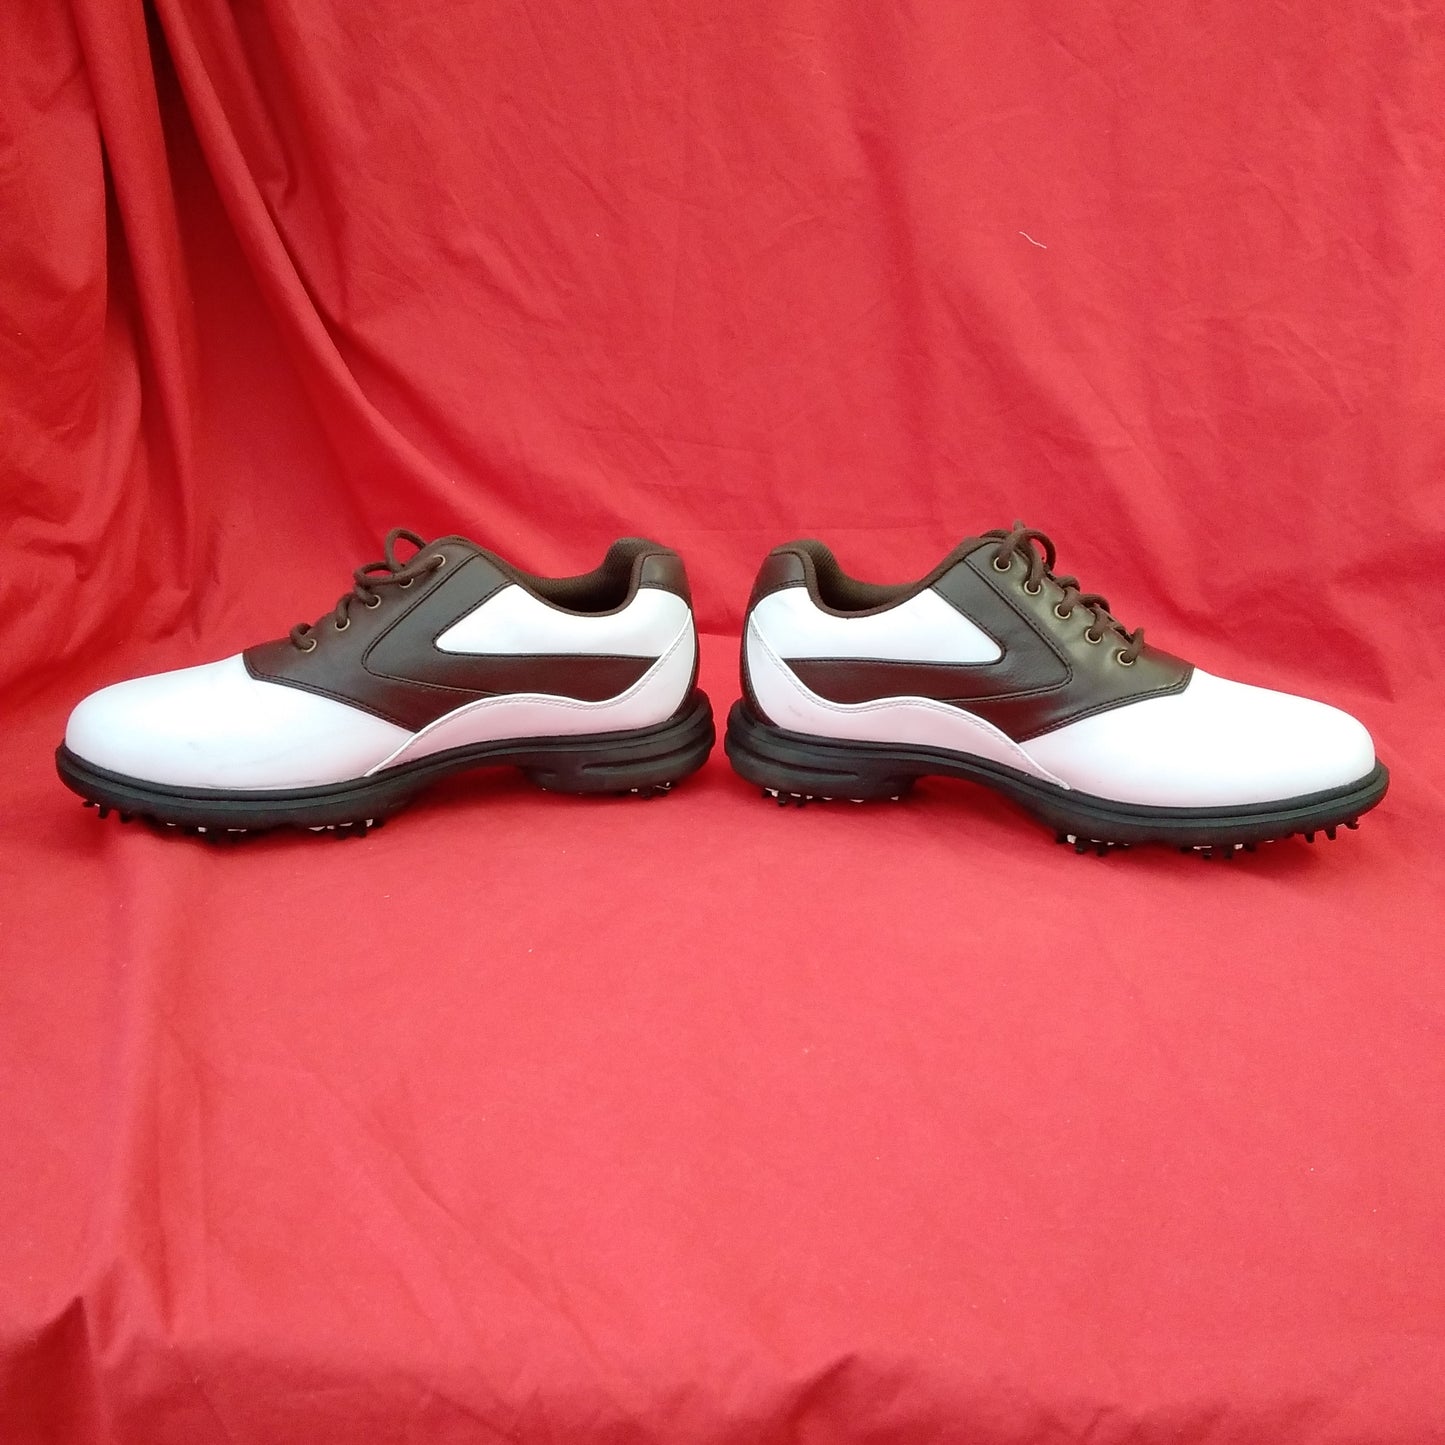 Men's Callaway White and Brown Leather Golf Shoes - Size: 8